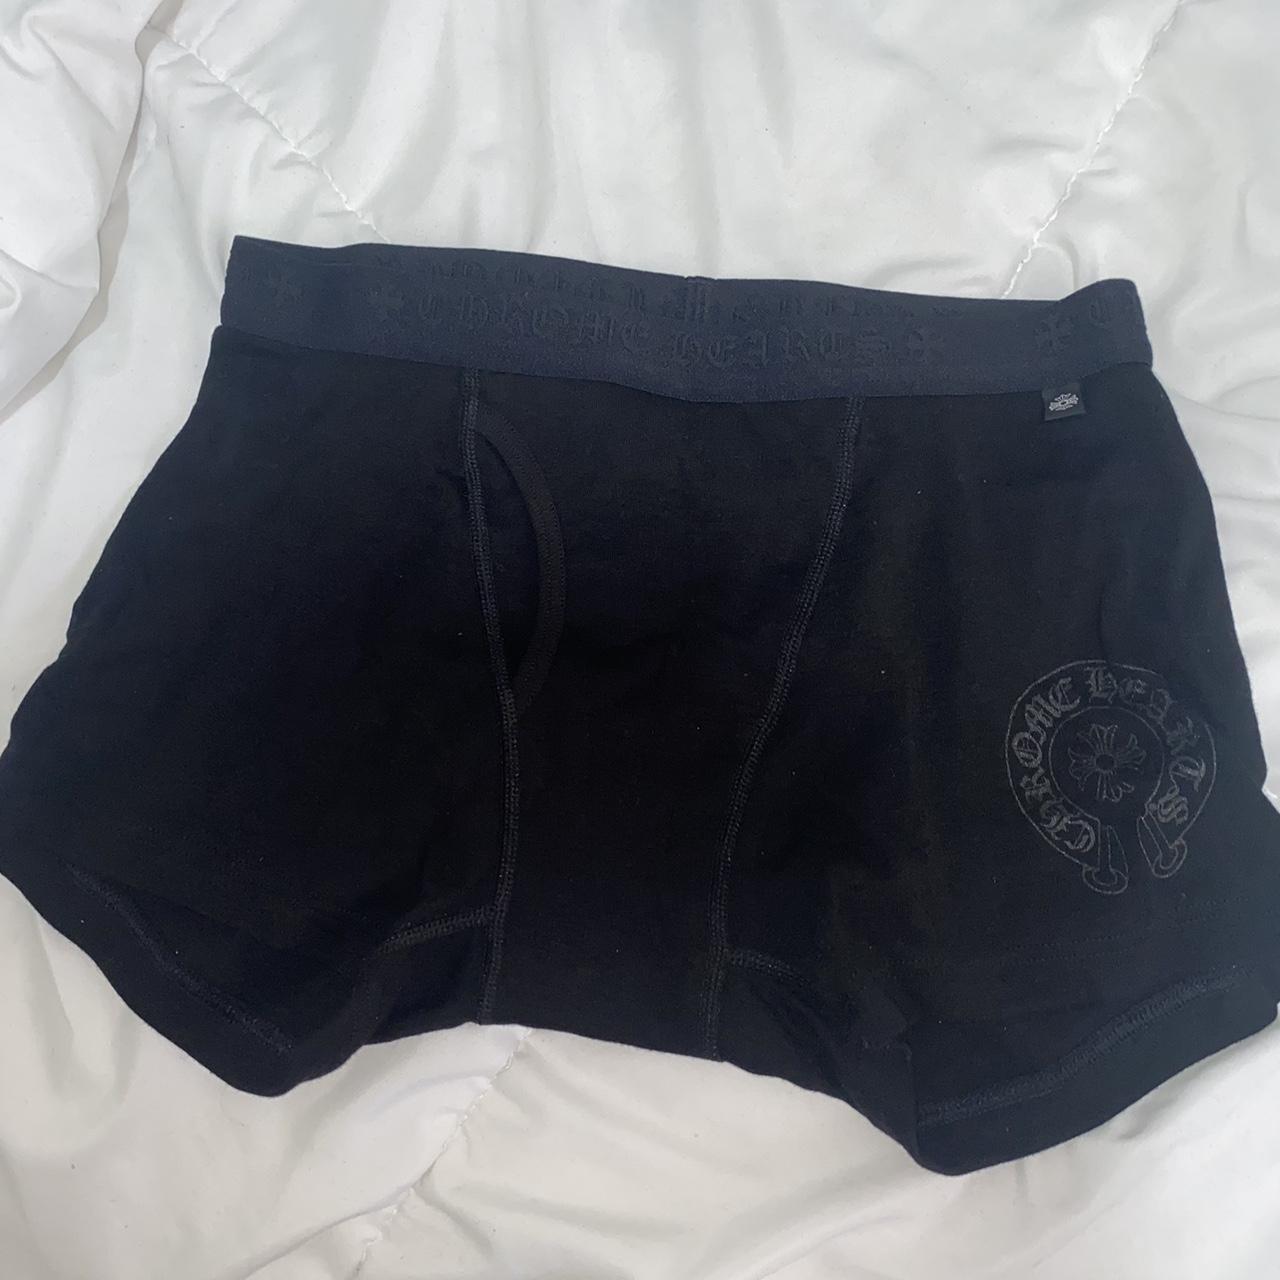 Chrome hearts boxers size M never worn or tried on... - Depop